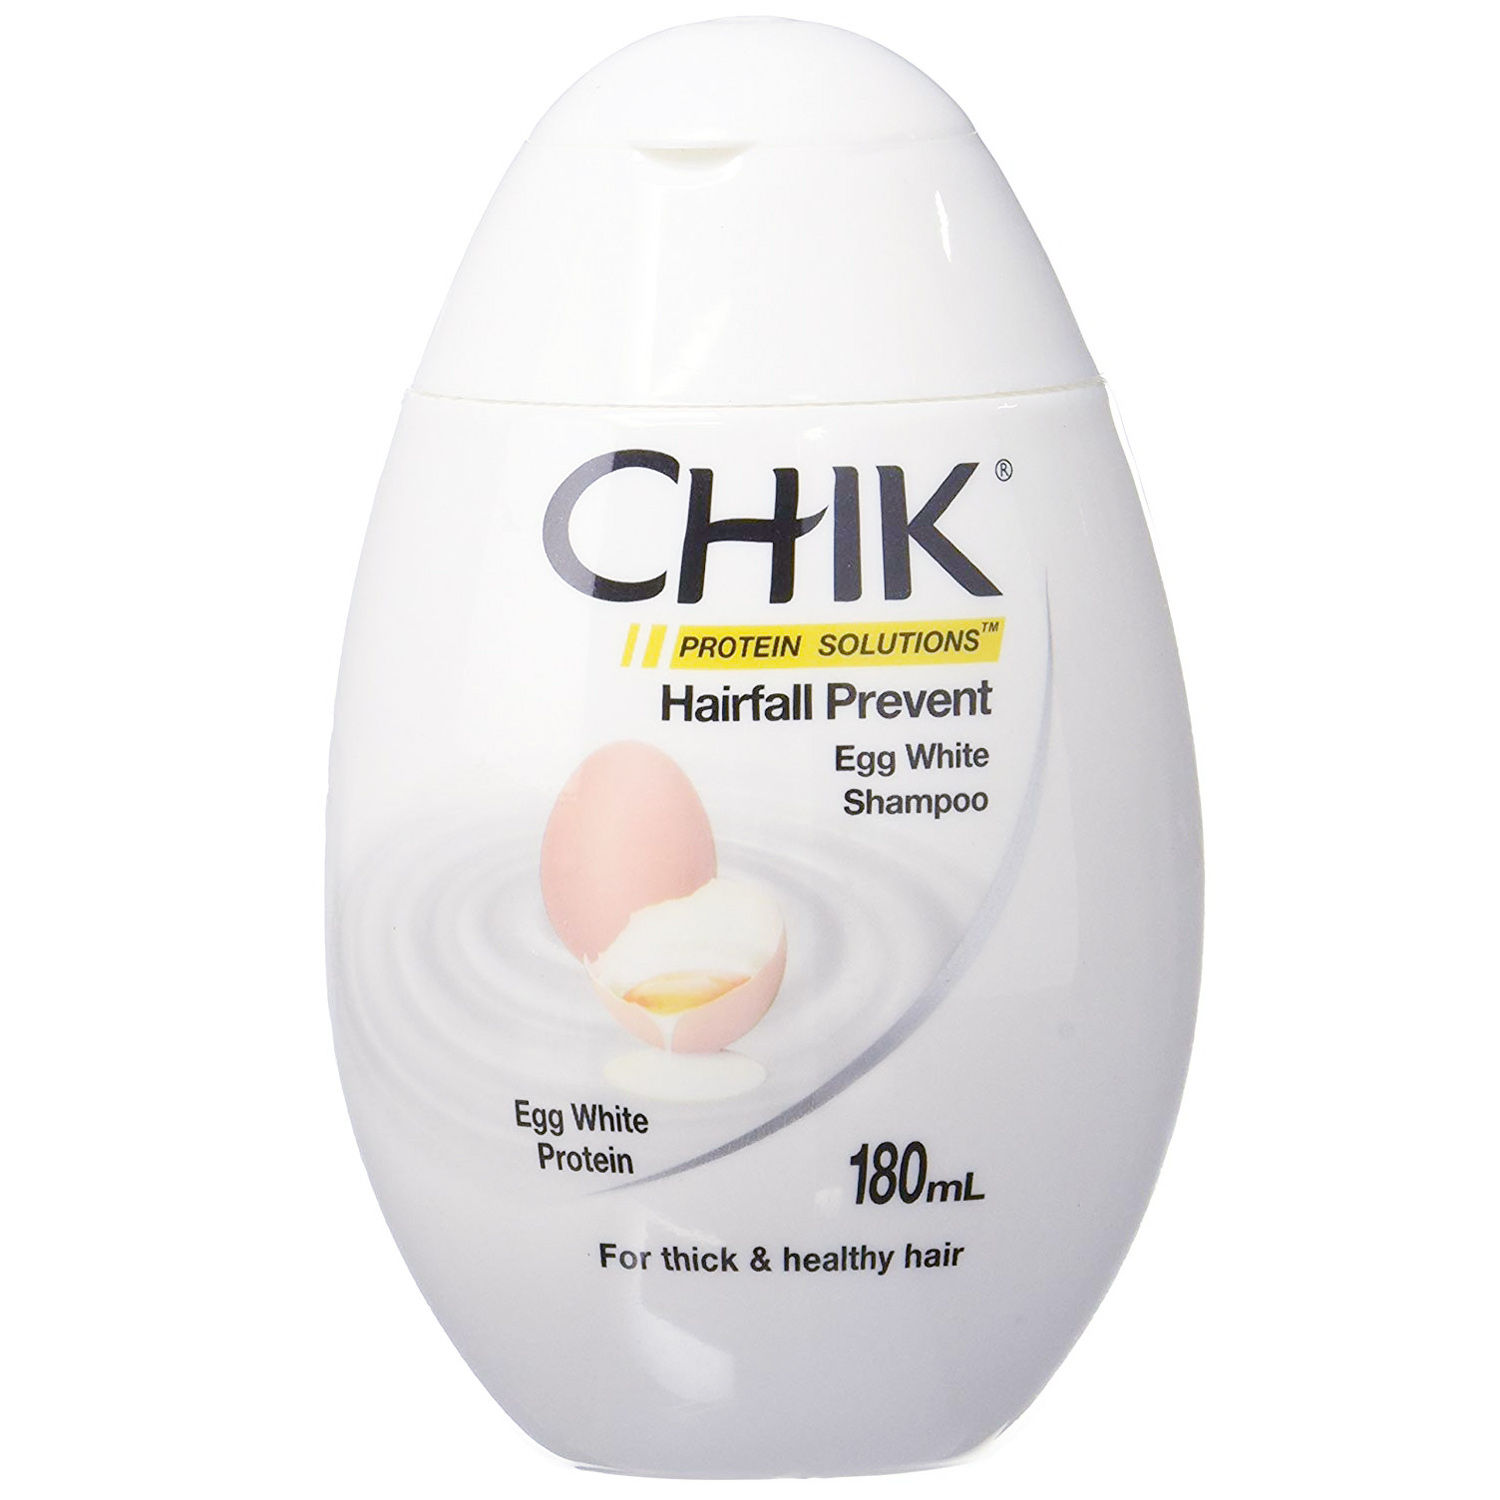 Buy Chik Hairfall Prevent Egg White Protein Shampoo in UK  USA at  healthwithherbal